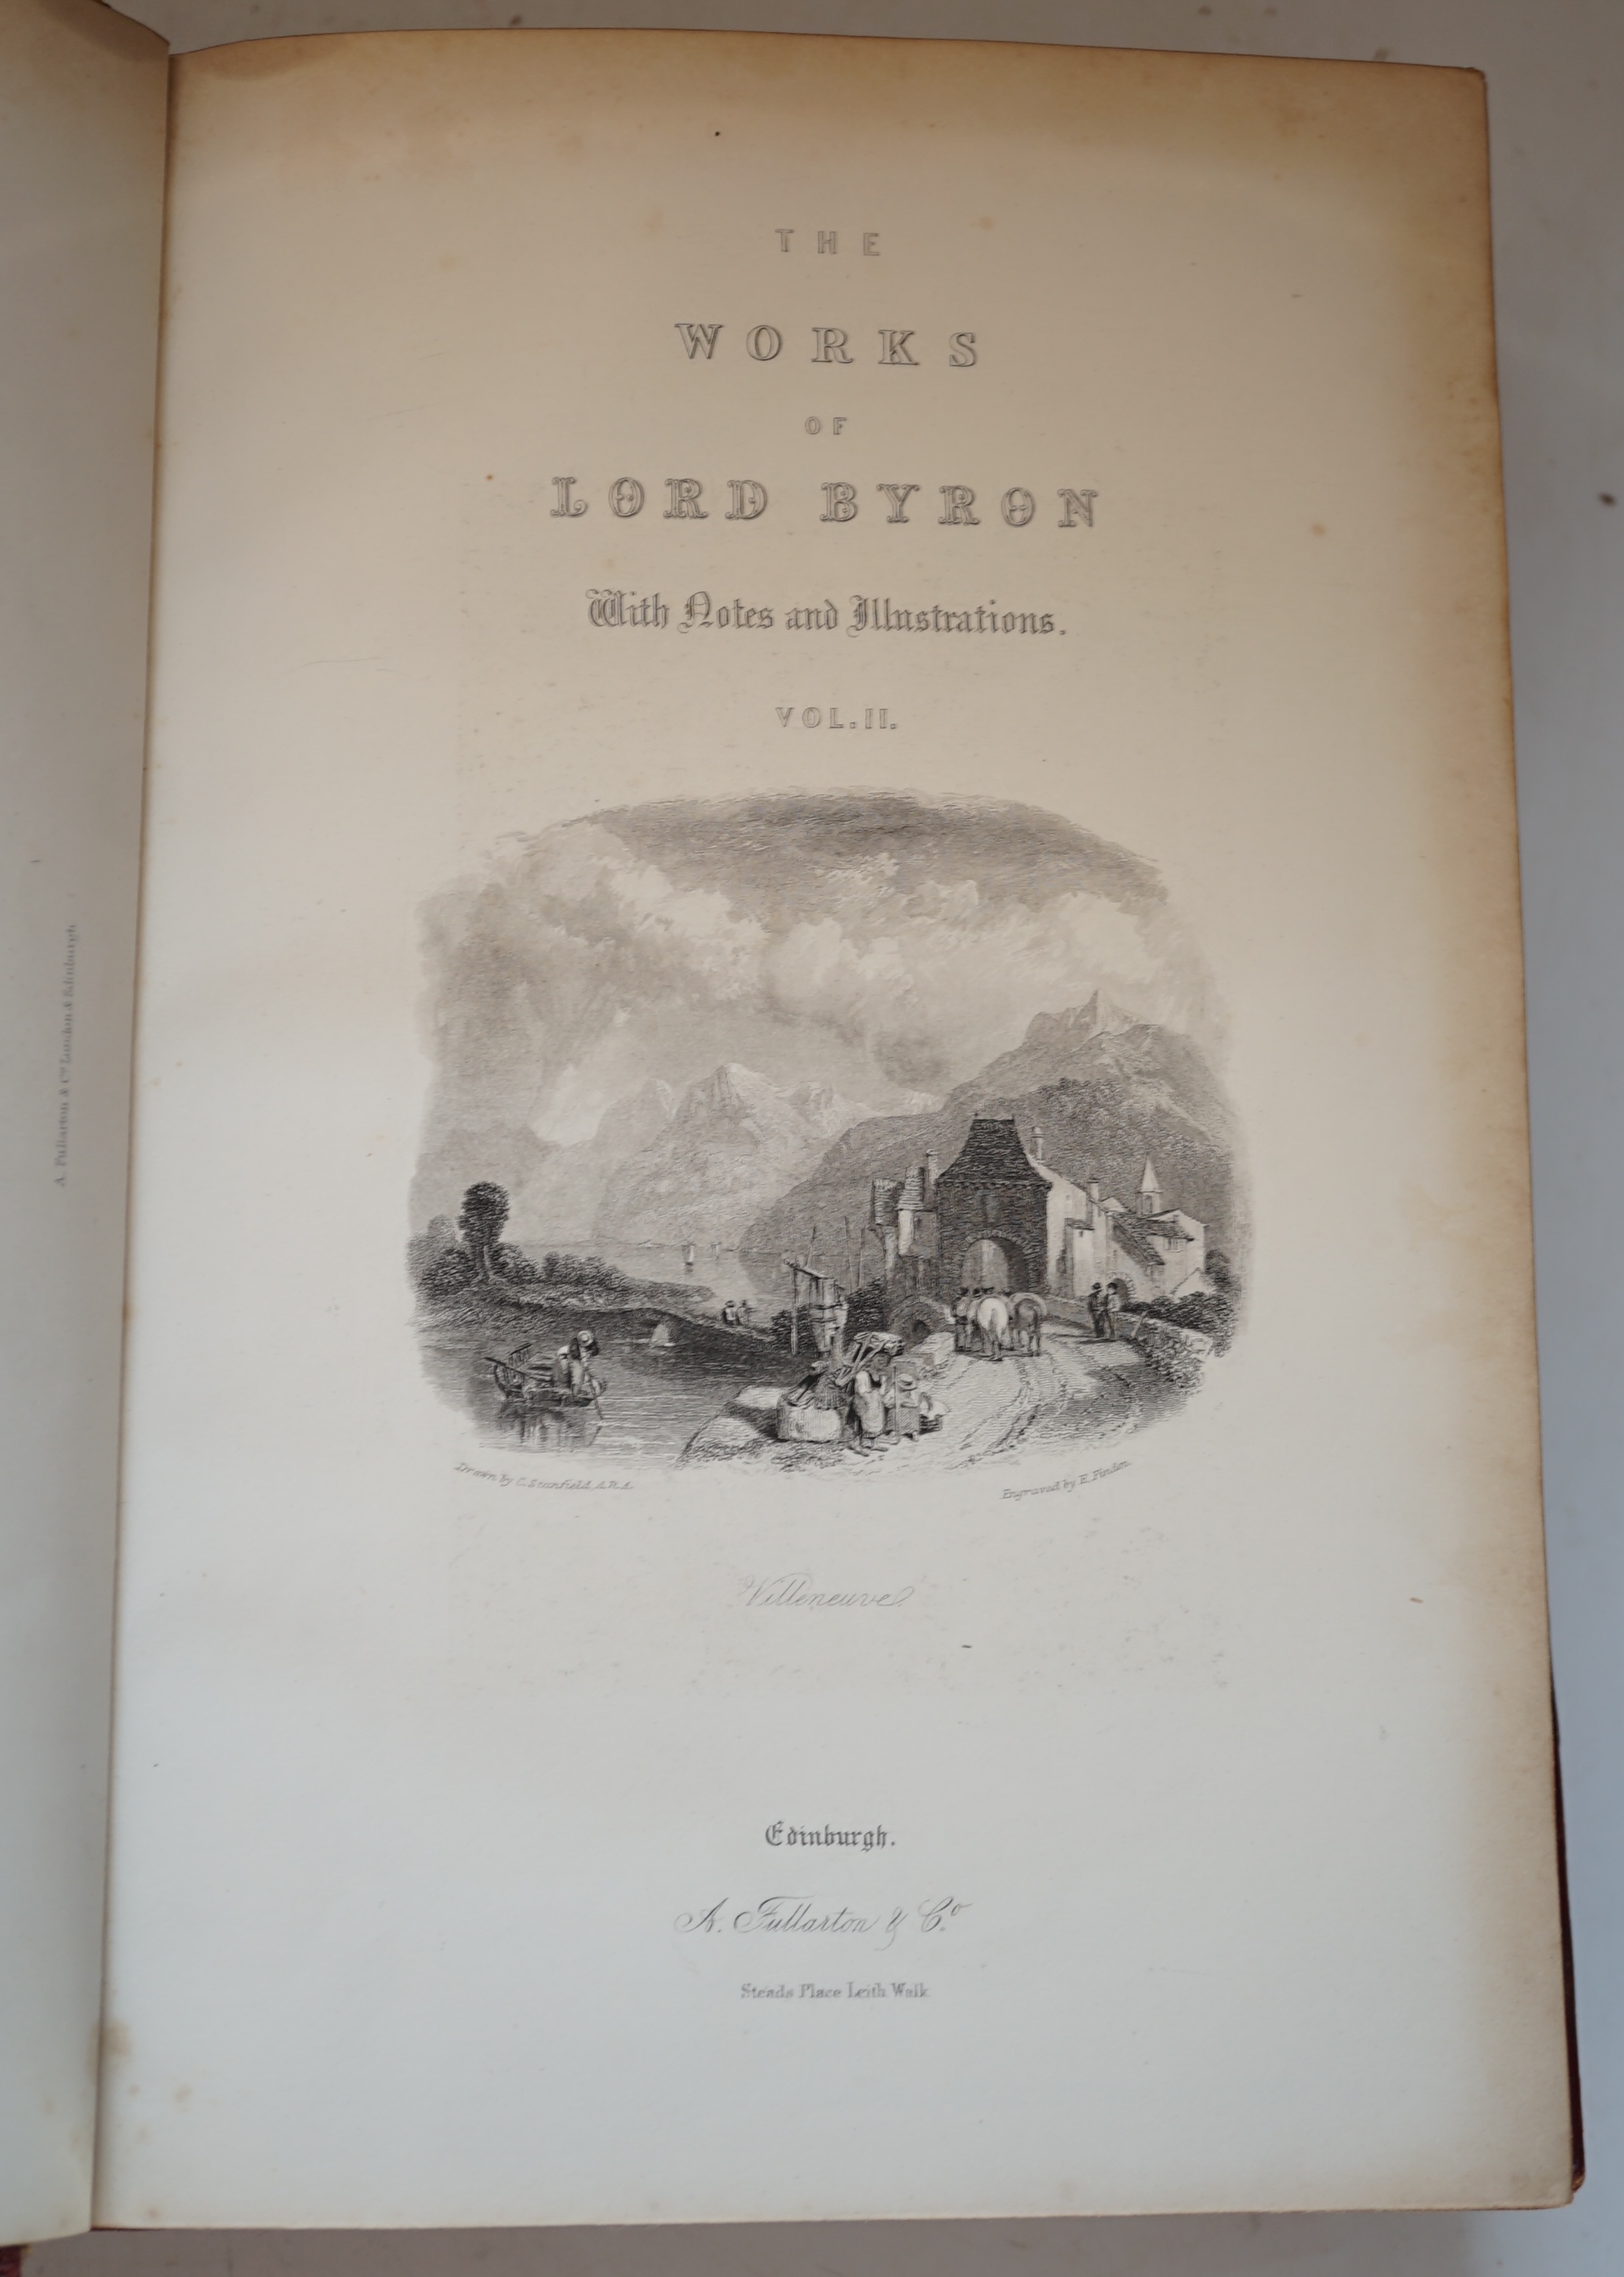 Byron, George Gordon Noel, Lord - The Works of Lord Byron: with a Life and Illustrative Notes, by William Anderson, 2 vols, 8vo, with portrait frontispiece and 58 engravings, half red morocco, A. Fullerton, Edinburgh, c.